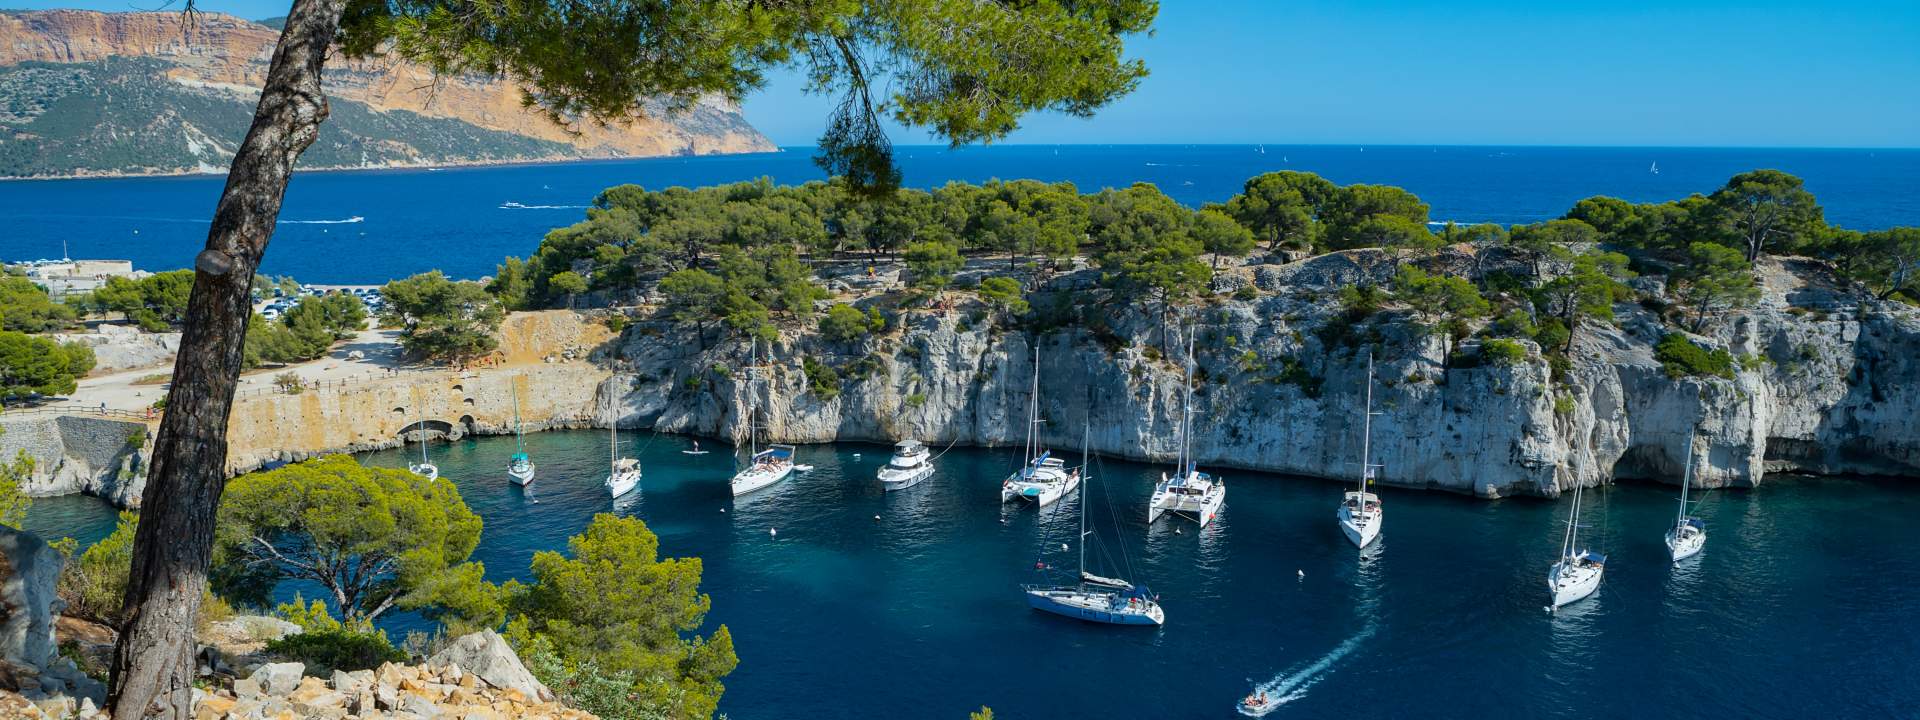 Sailing in the Calanques of Marseille